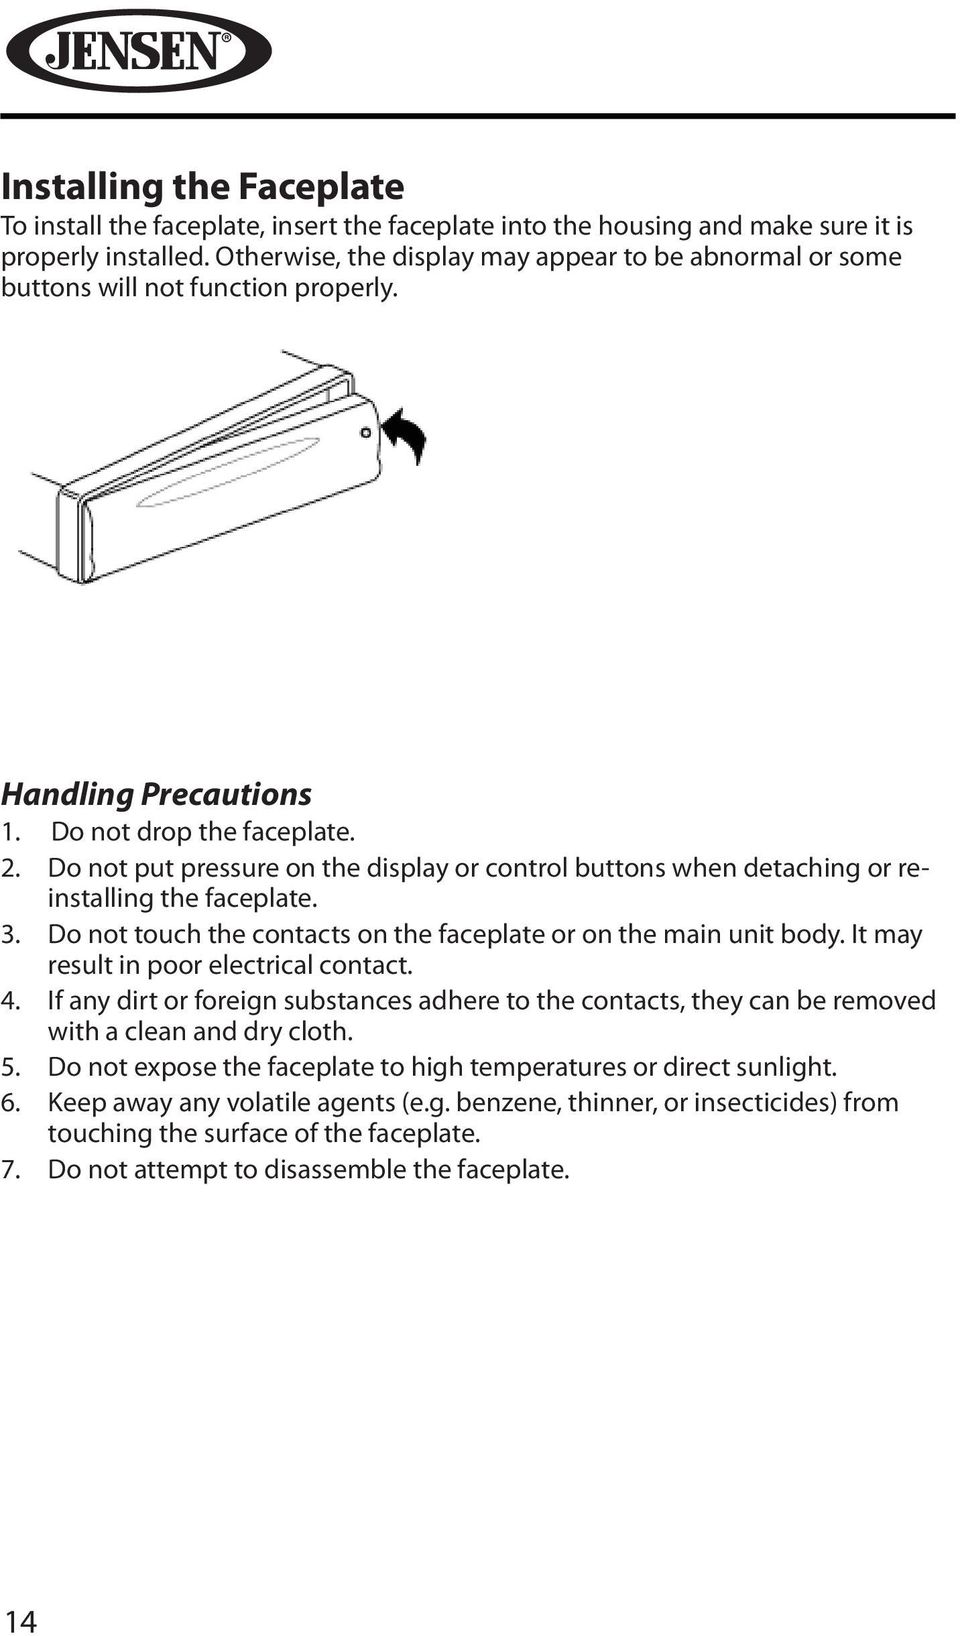 Do not put pressure on the display or control buttons when detaching or reinstalling the faceplate. 3. Do not touch the contacts on the faceplate or on the main unit body.